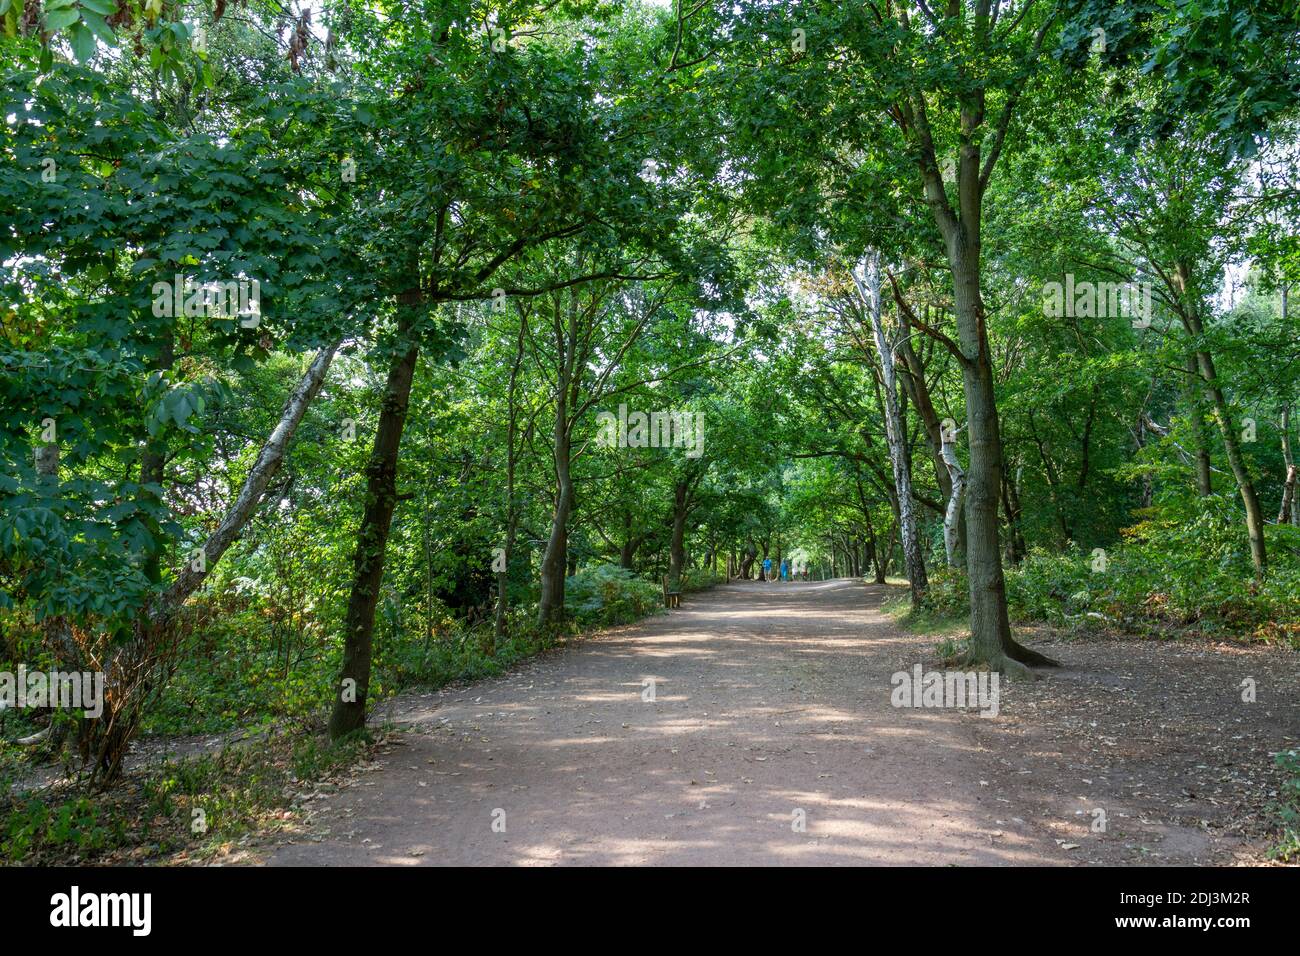 General view of people walking through the trees of Sherwood Forest, mythical home of Robin Hood and his Merry Men, Nottinghamshire, UK. Stock Photo